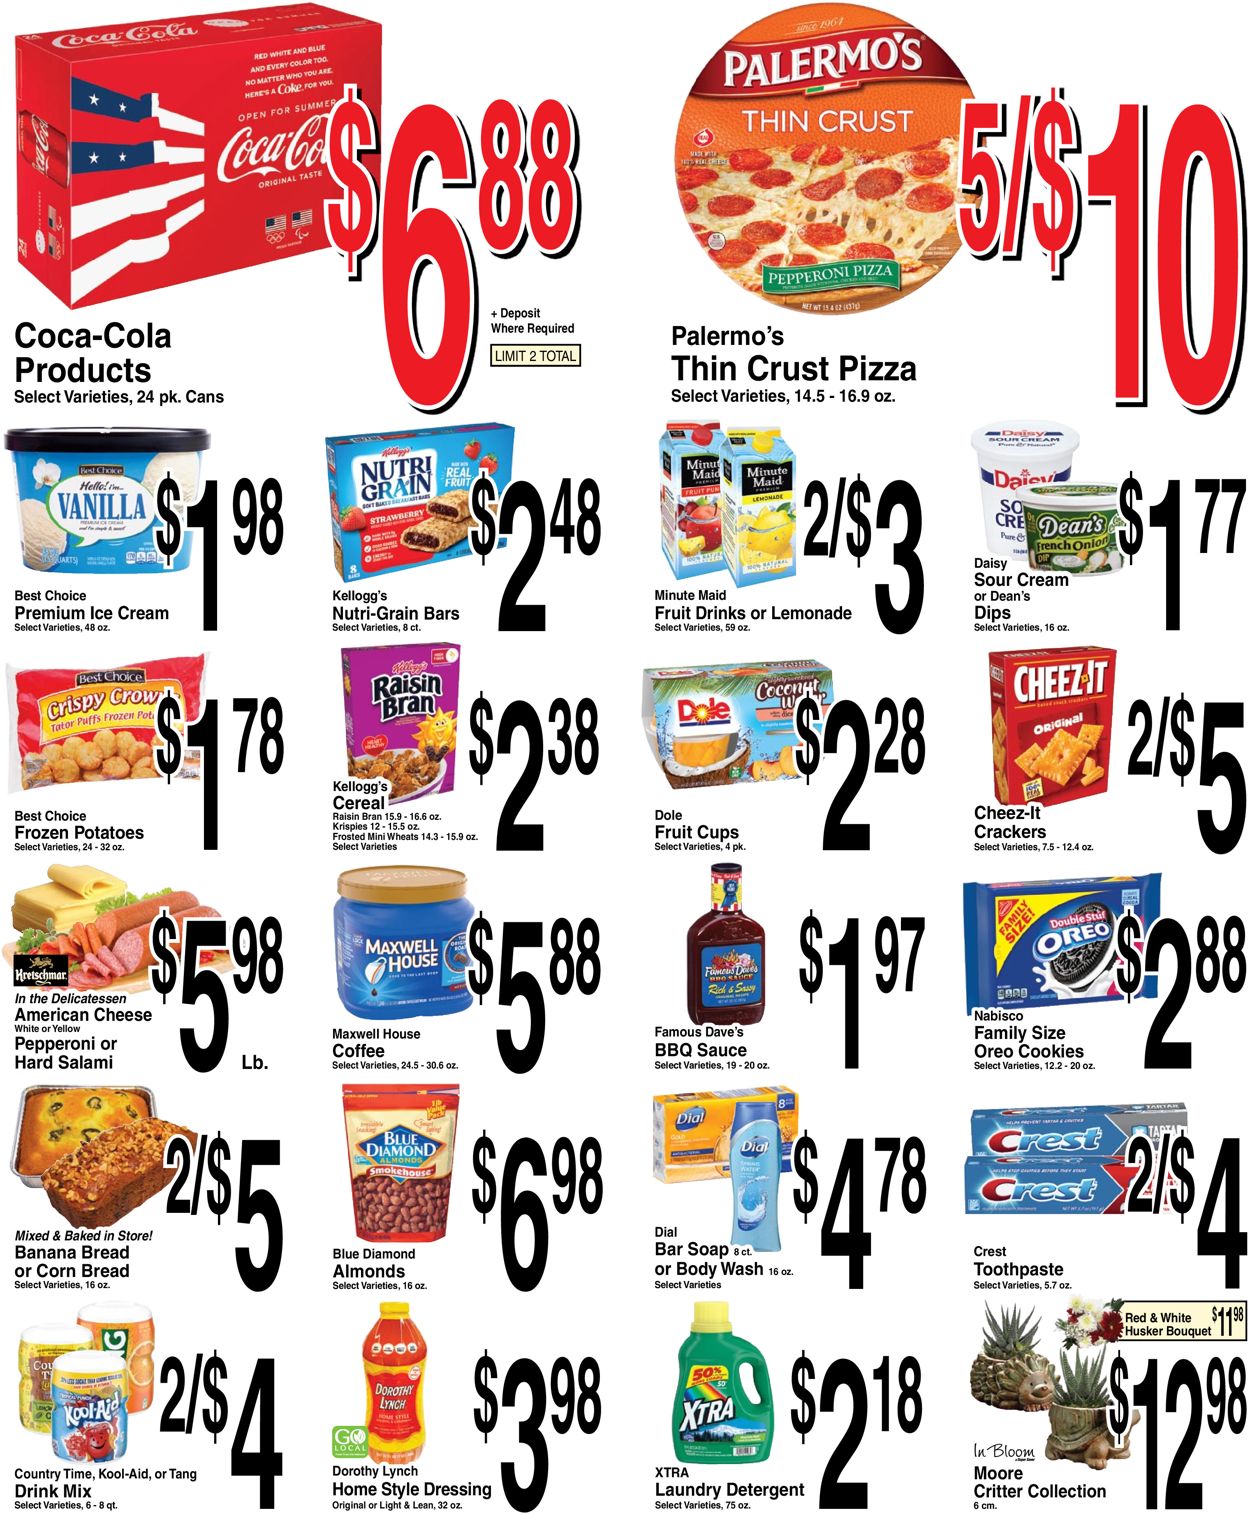 Super Saver Ad from 08/25/2021